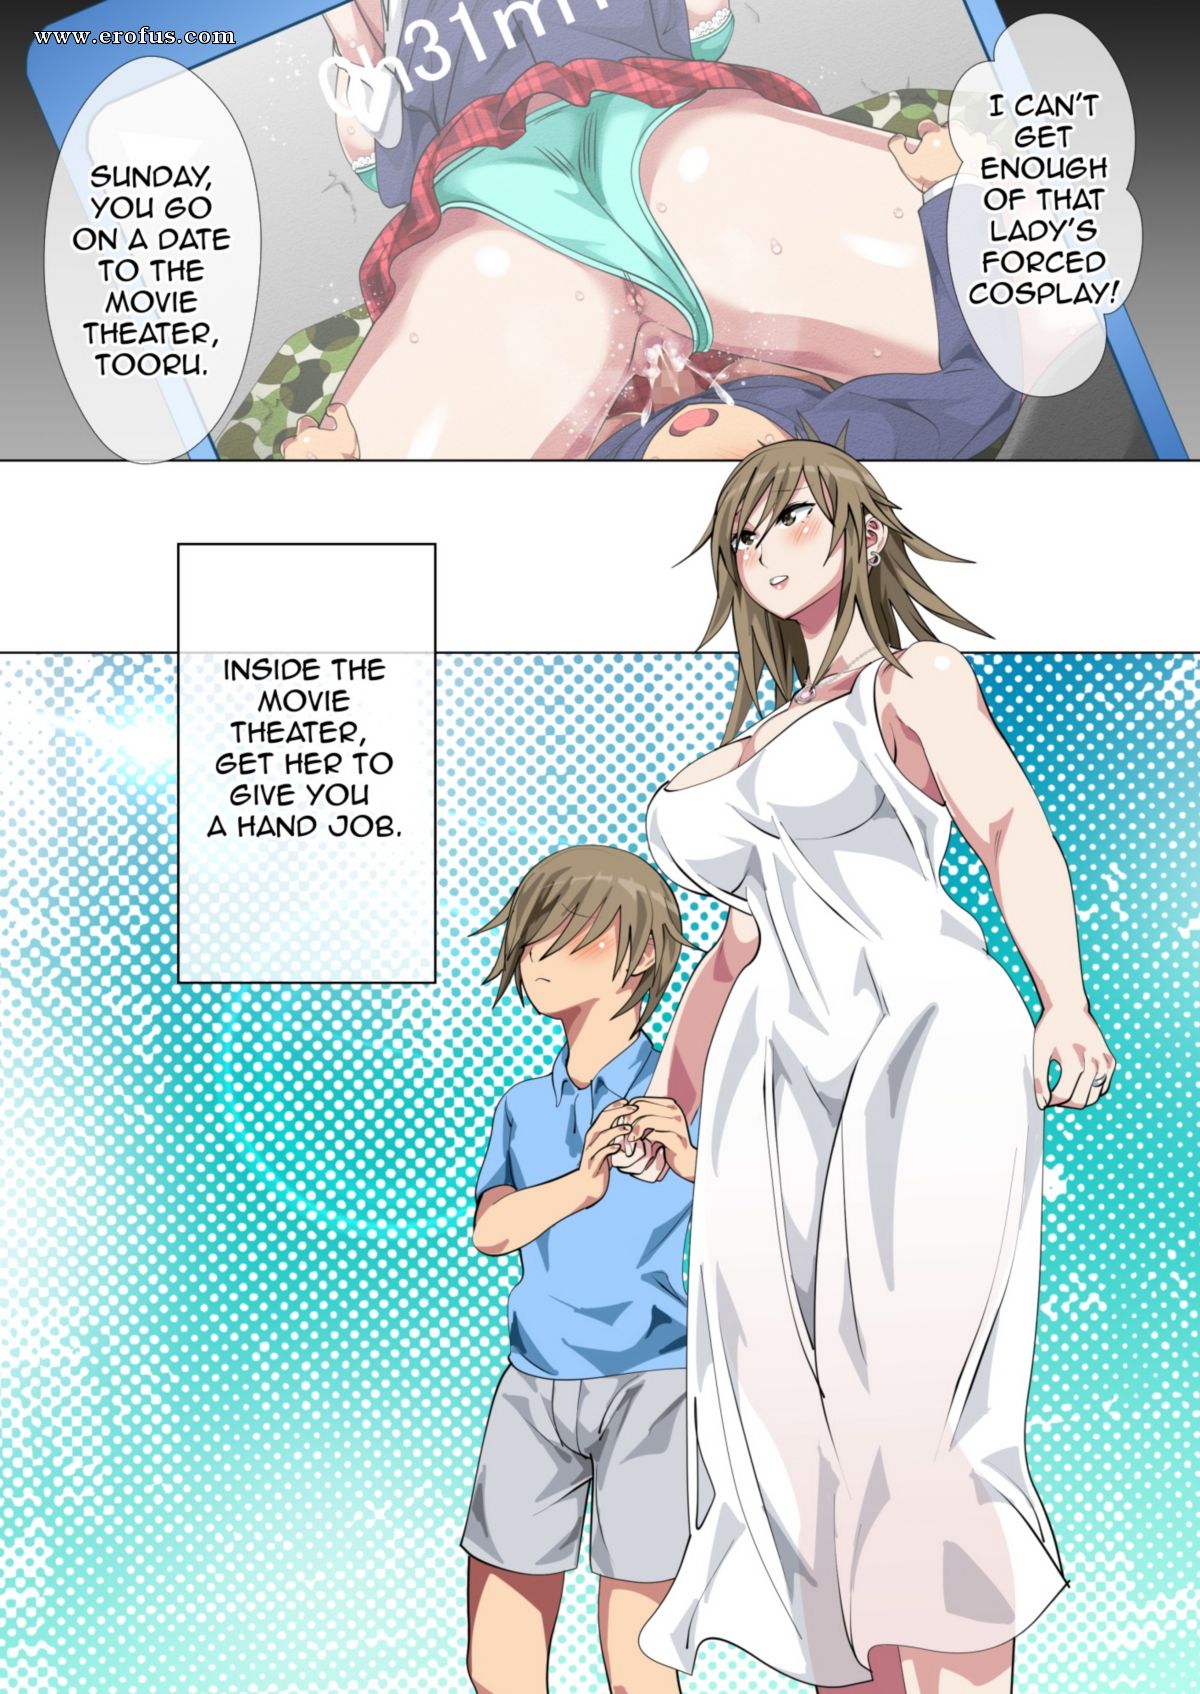 Page 92 hentai-and-manga-english/circle-spice/the-consequences-of-a-mother-being-dragged-into- making-a-sex-video-because-of-her-son-getting-bullied Erofus photo